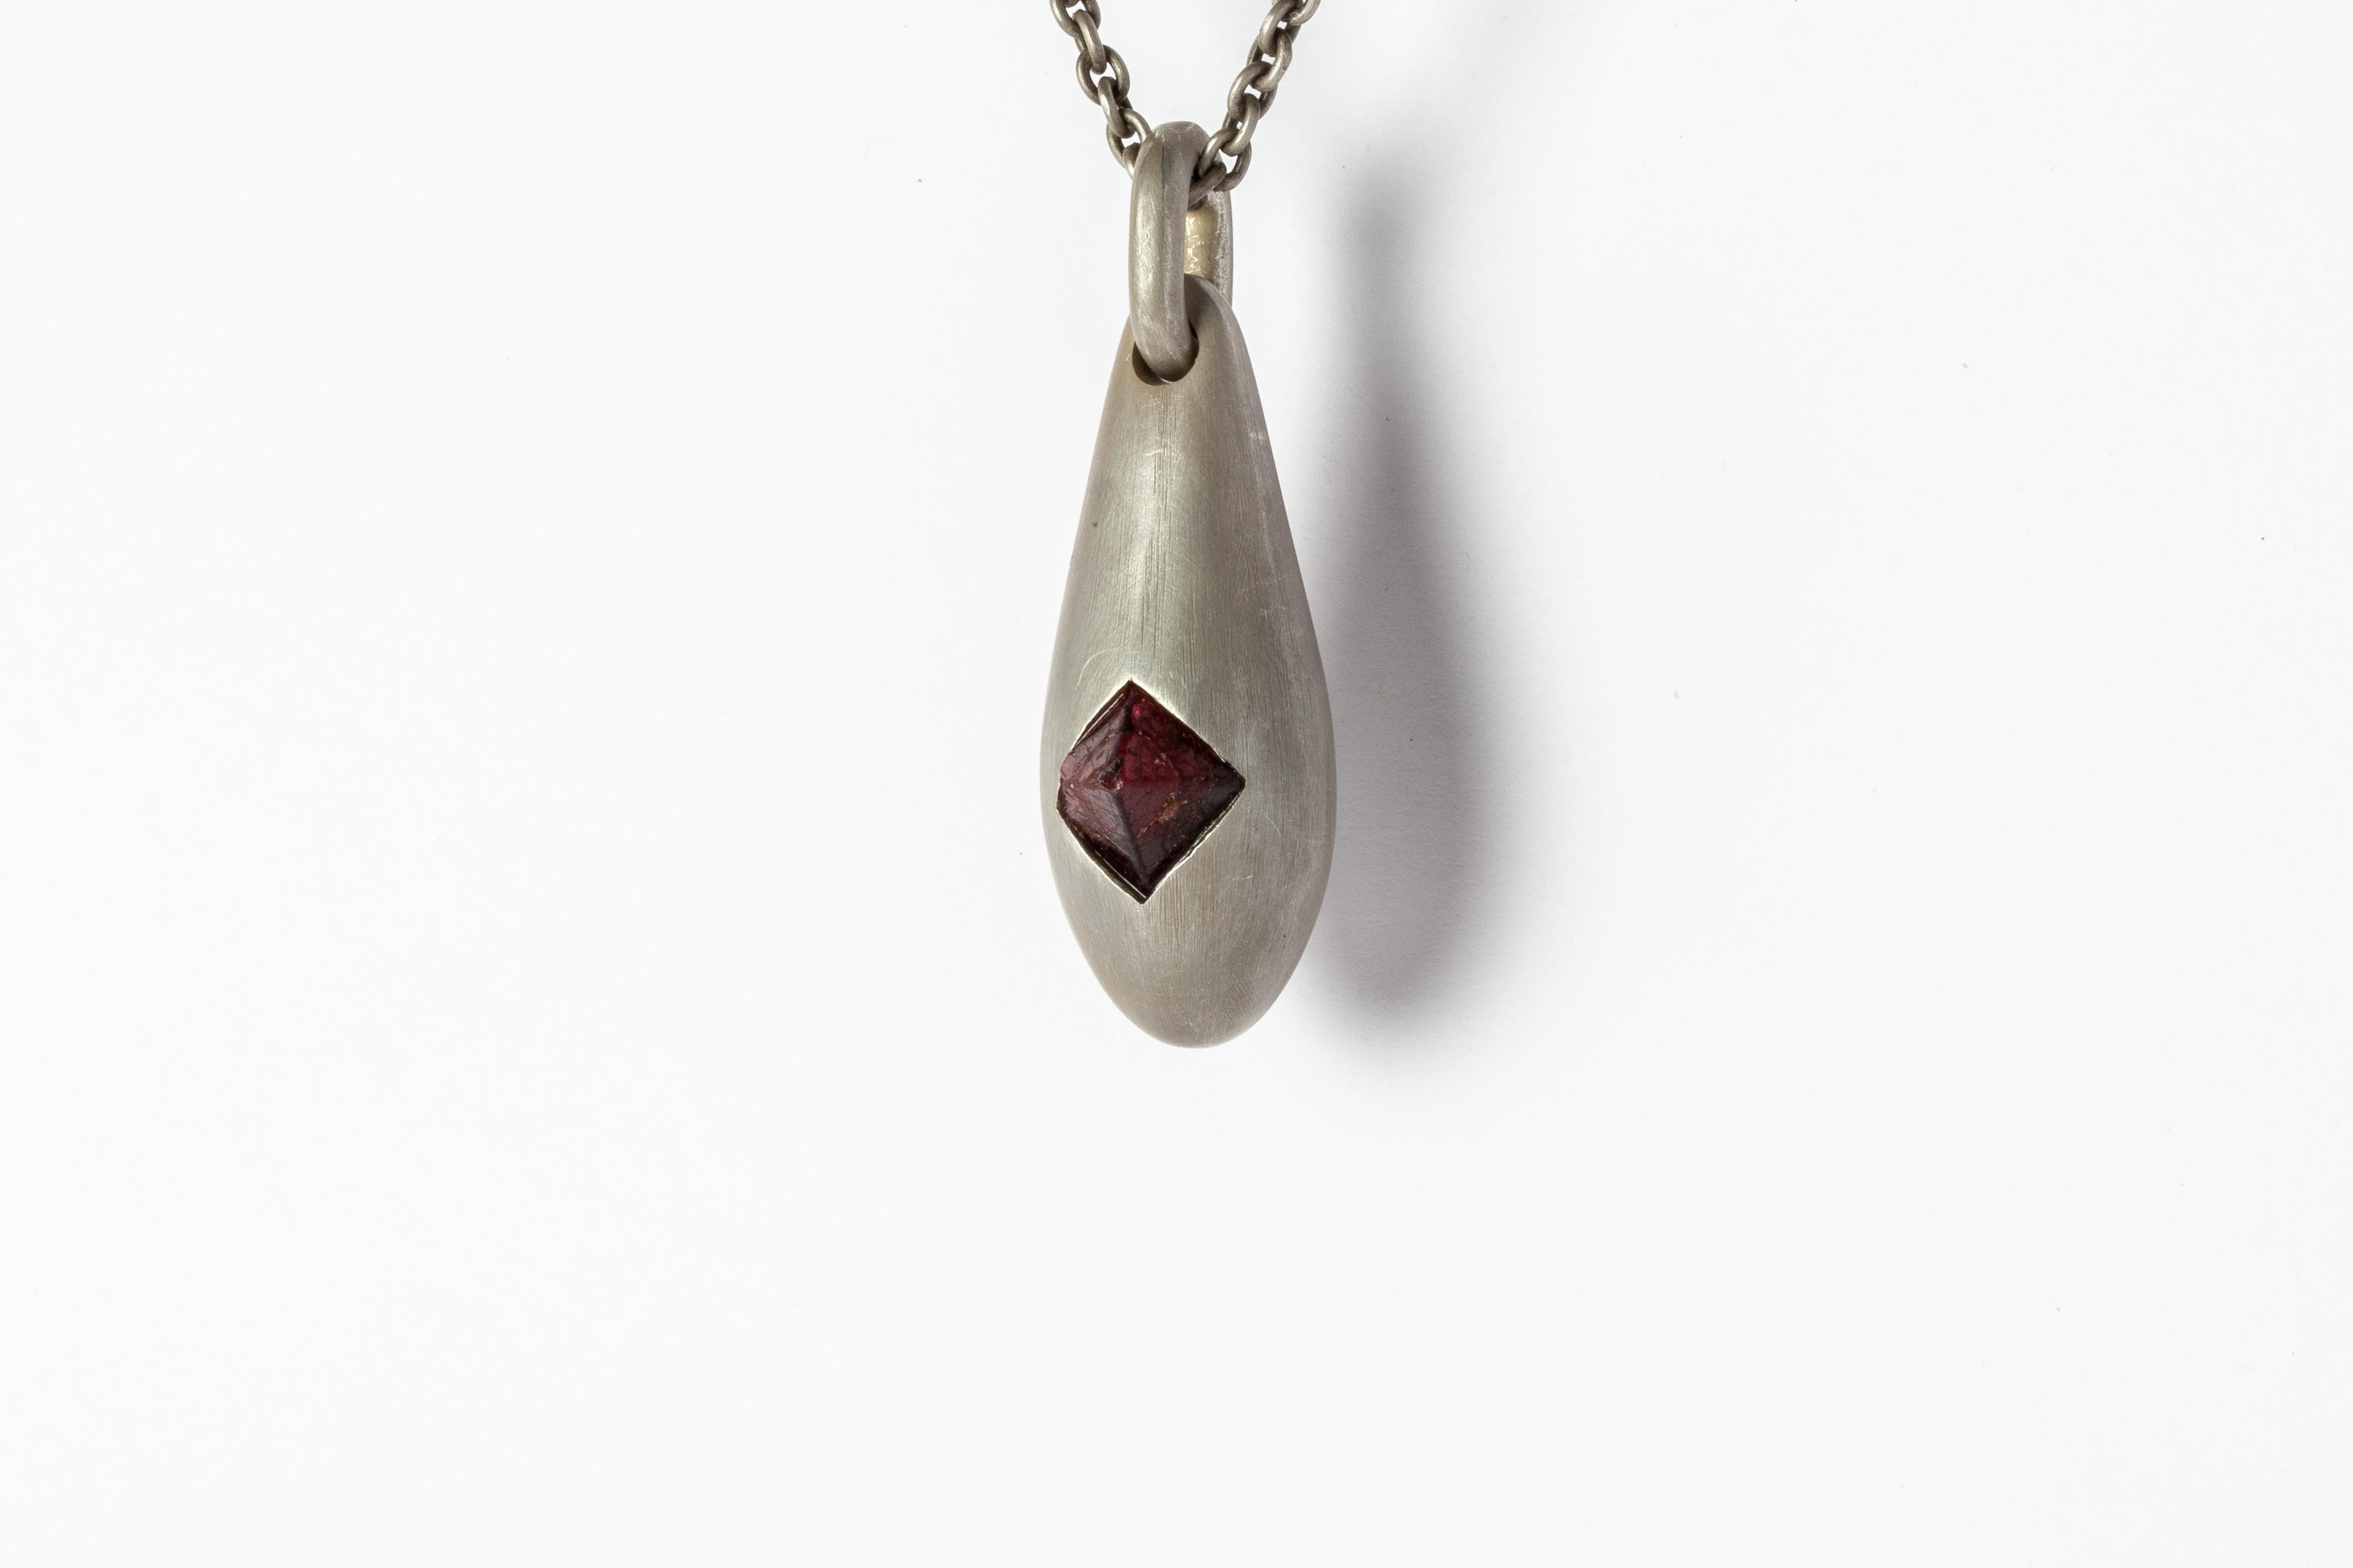 Pendant necklace made in acid treated sterling silver and a rough of spinel. It comes on 74 cm sterling silver chain.